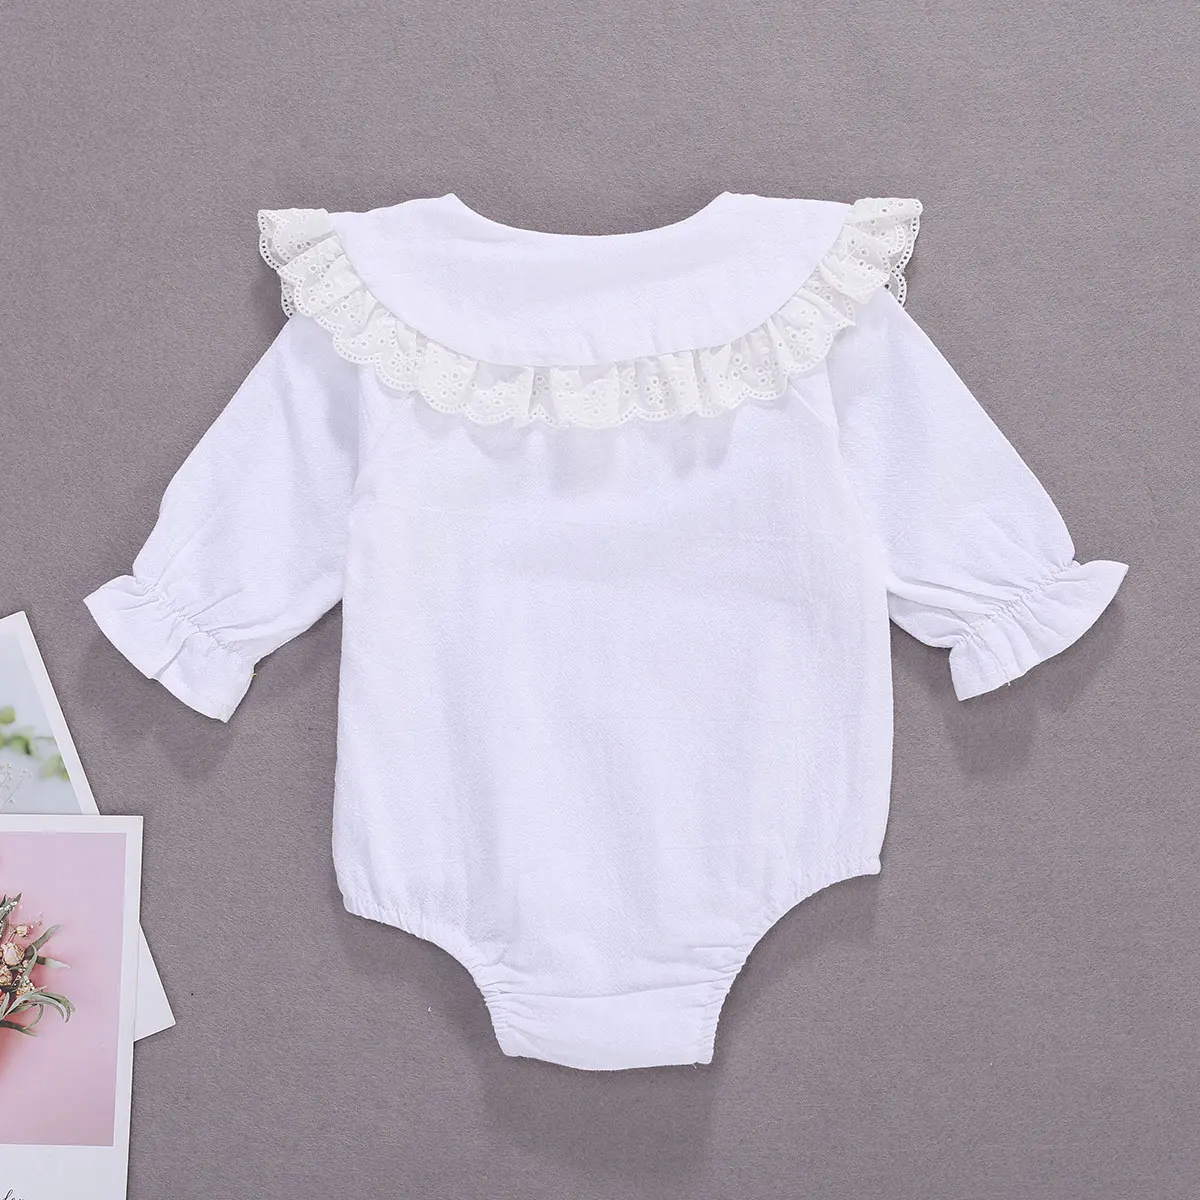 

0-18M Autumn Toddler Baby Girls Bodysuit Cotton Solid Color Jumpsuits Long Sleeve Lace Ruffle Peter Pan Collar Playsuit Top